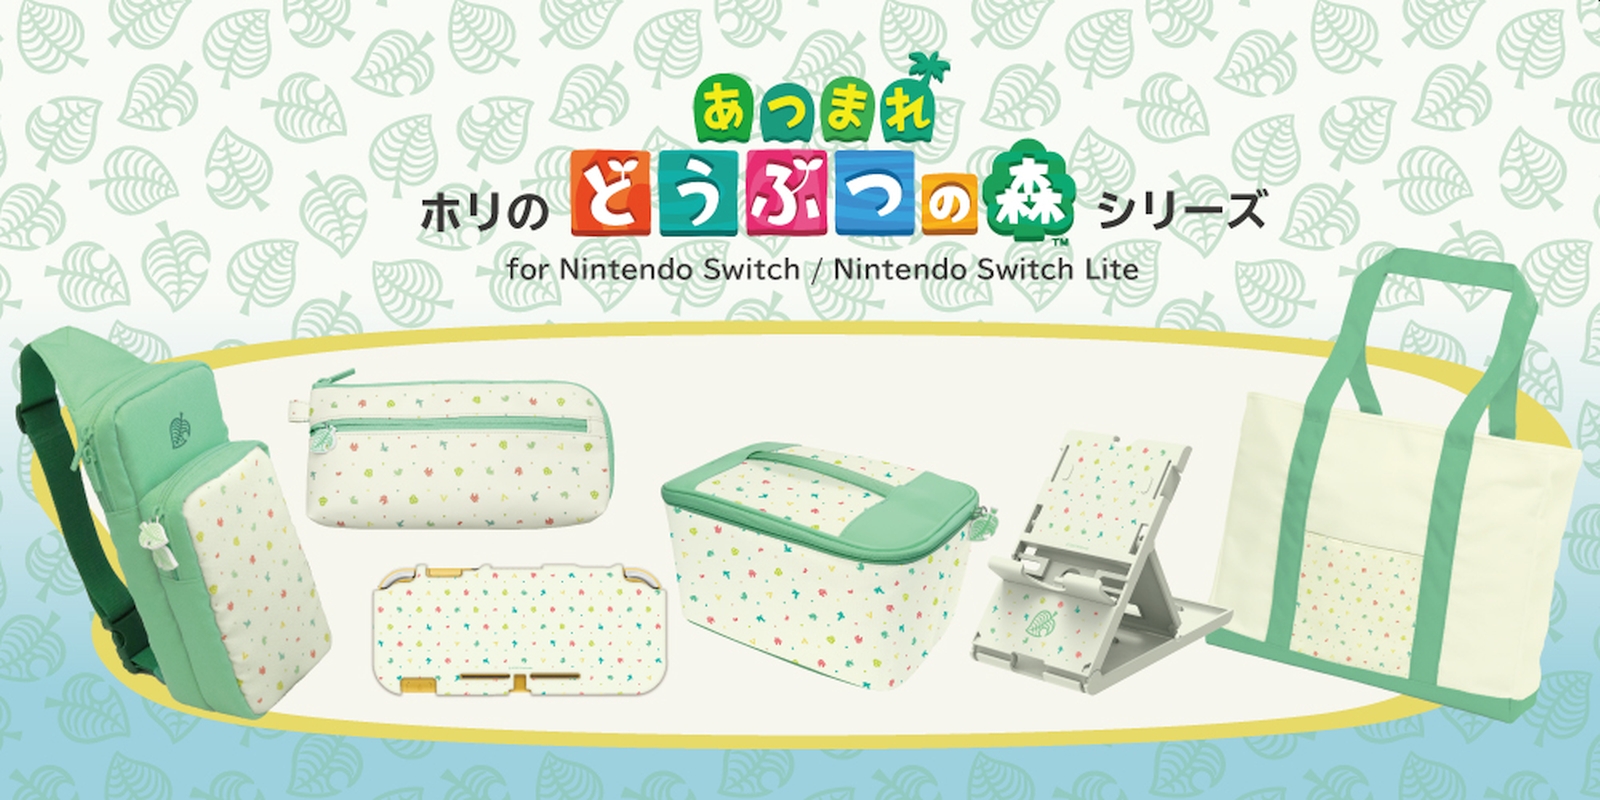 HORI Releases New Line Of Animal Crossing: New Horizons Accessories